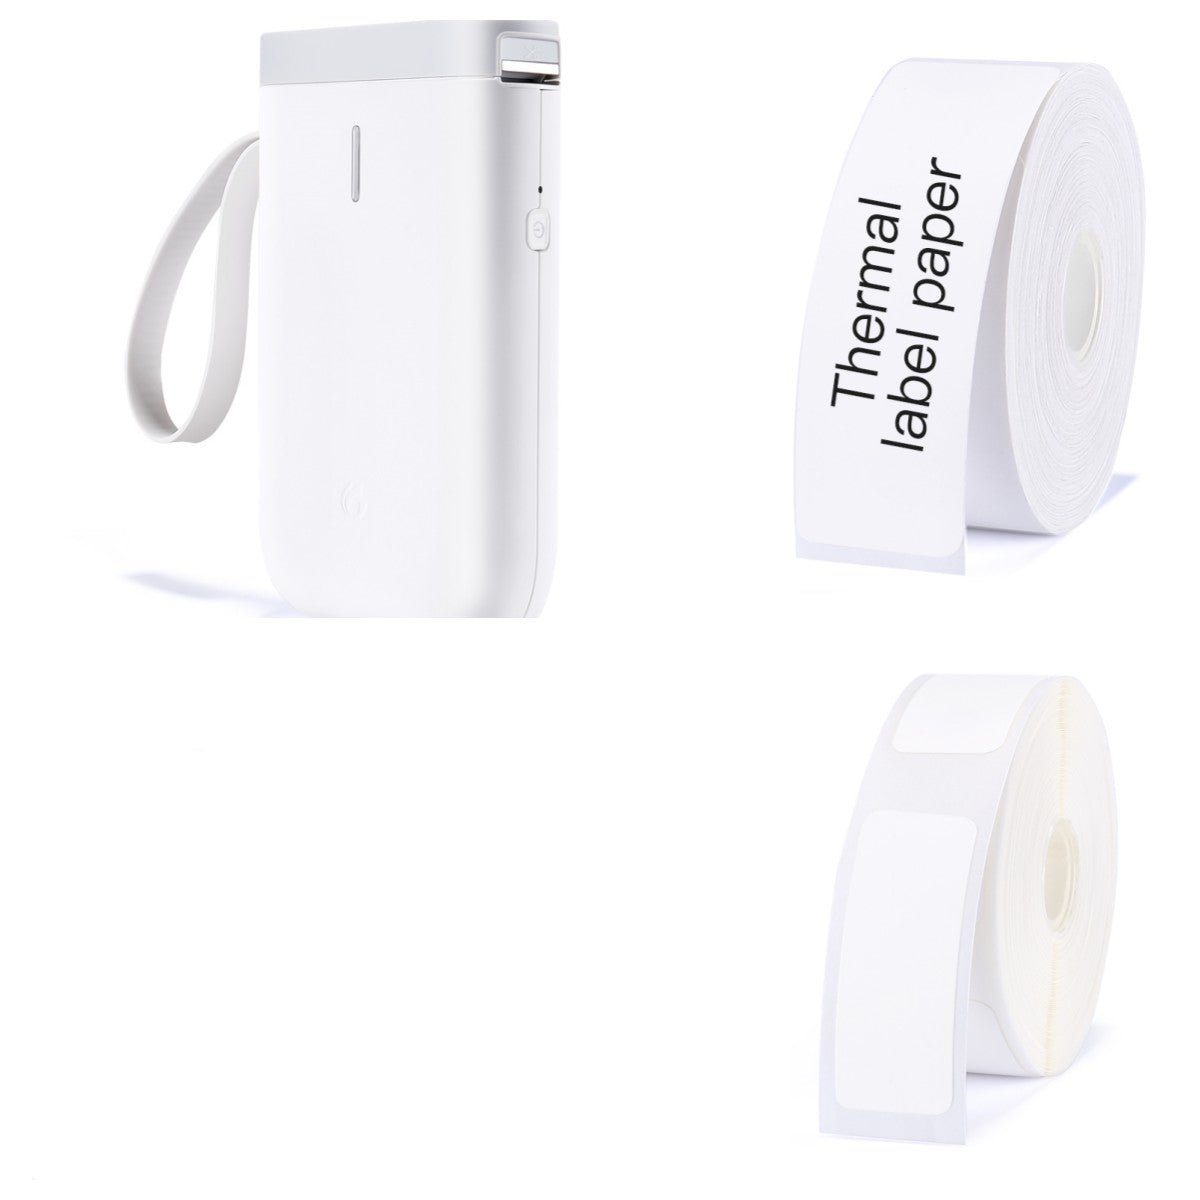 D11 Label Printer Bluetooth Household Non Drying Label Machine Fast Printing Home Use Office